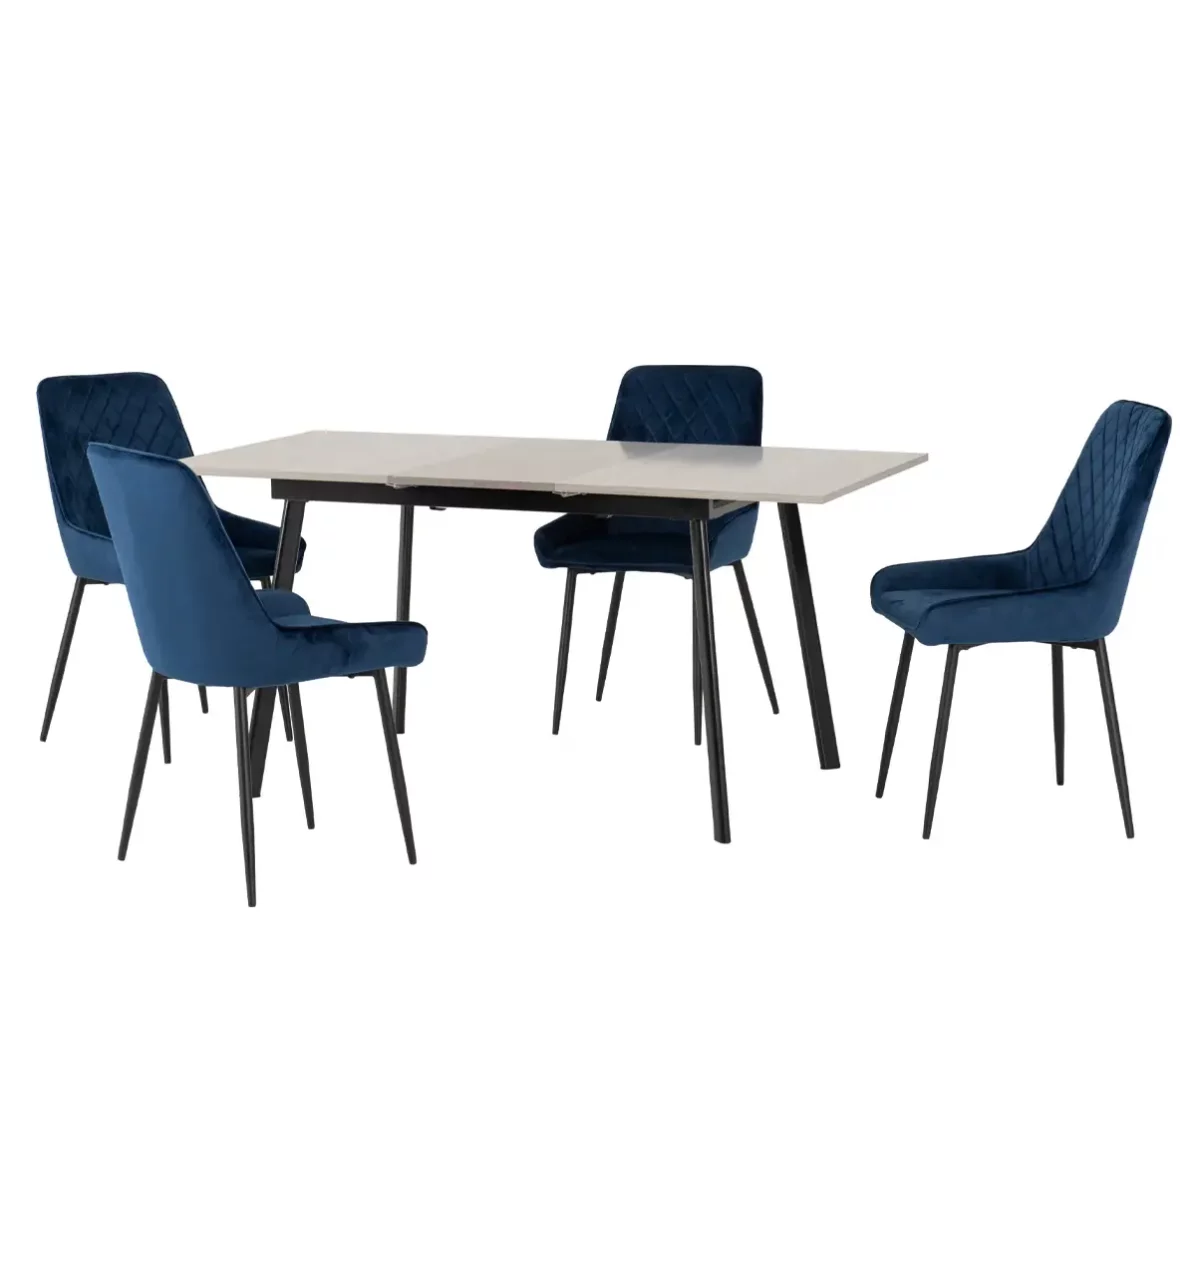 Avery Extending Dining Set with Avery Chairs - Sapphire Blue